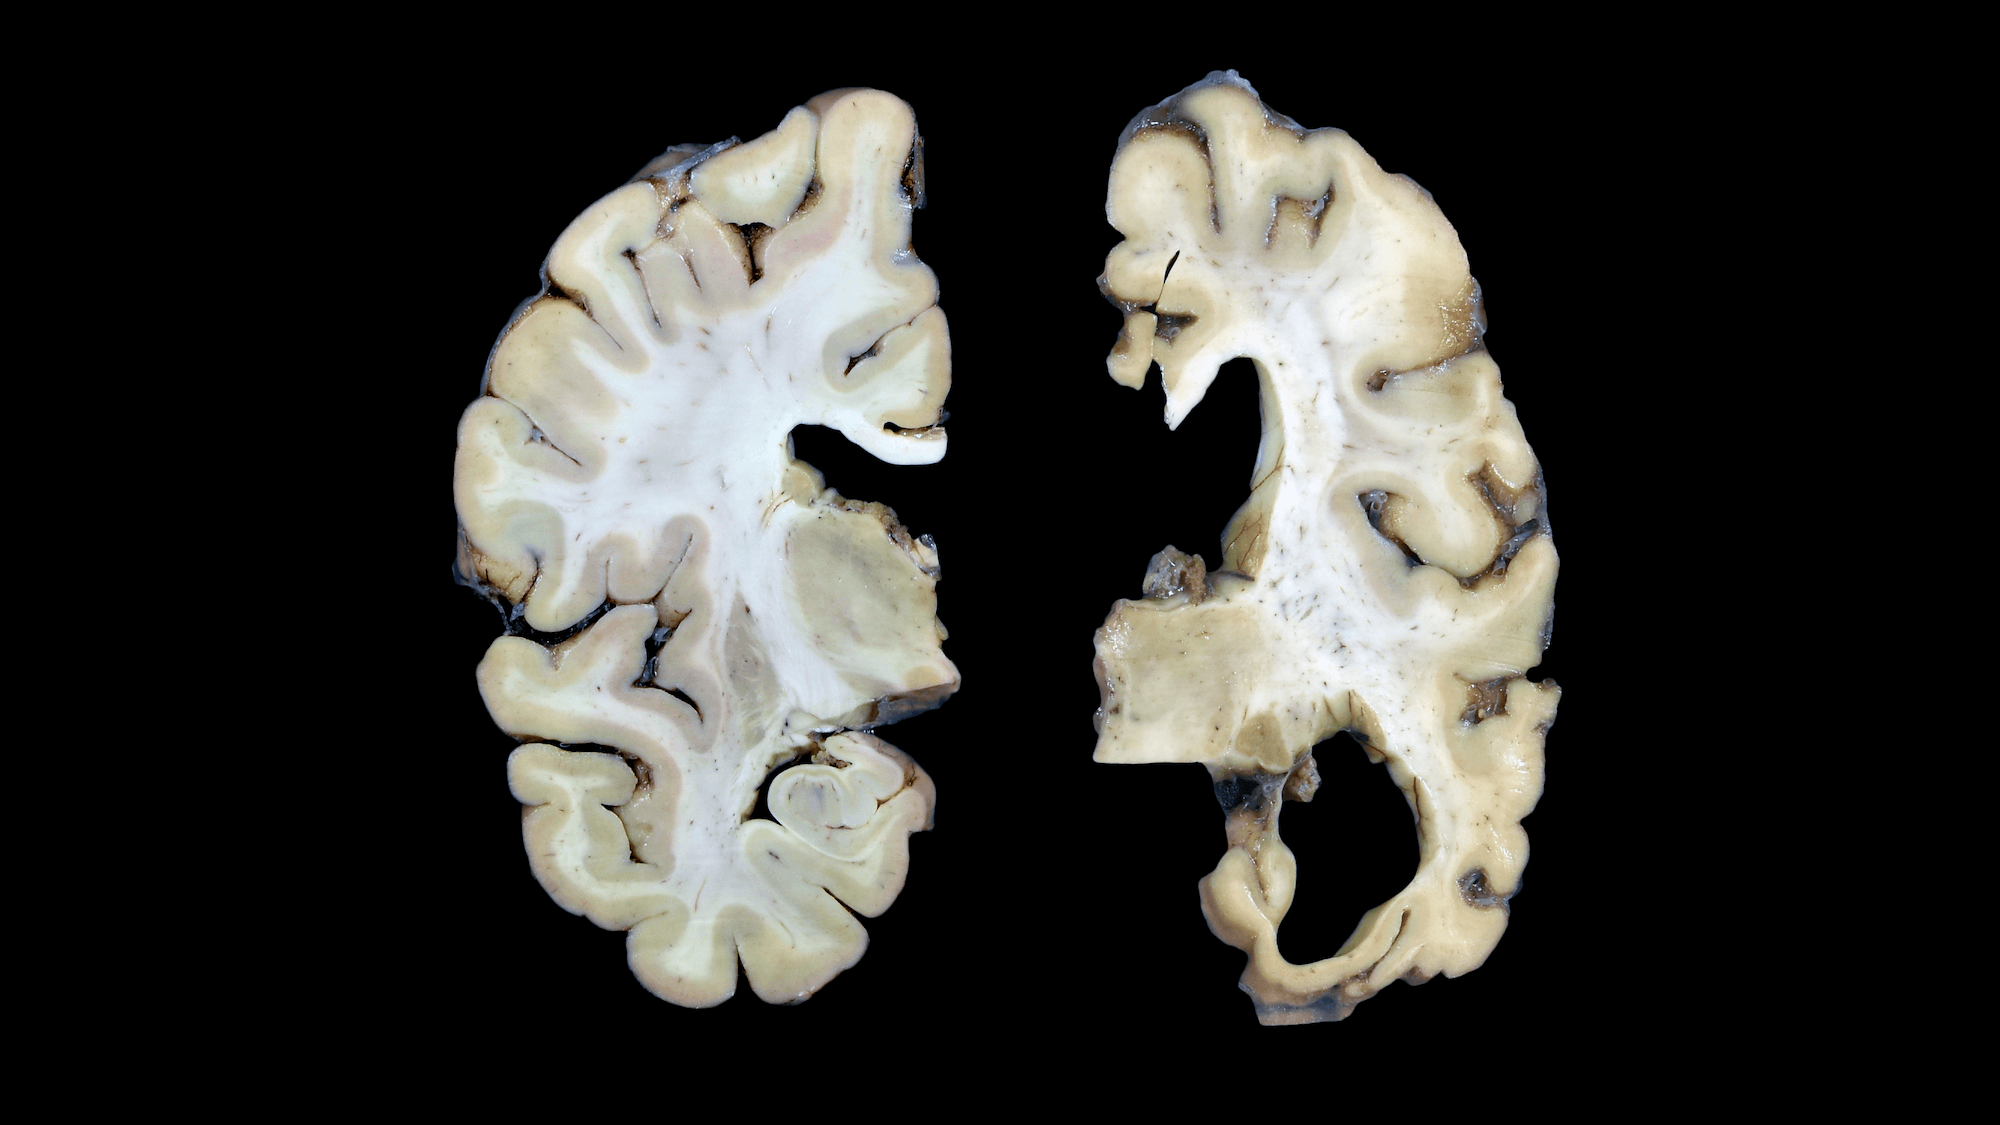 Sections of a healthy human brain (left) and a brain from a patient with Alzheimer’s disease (right).